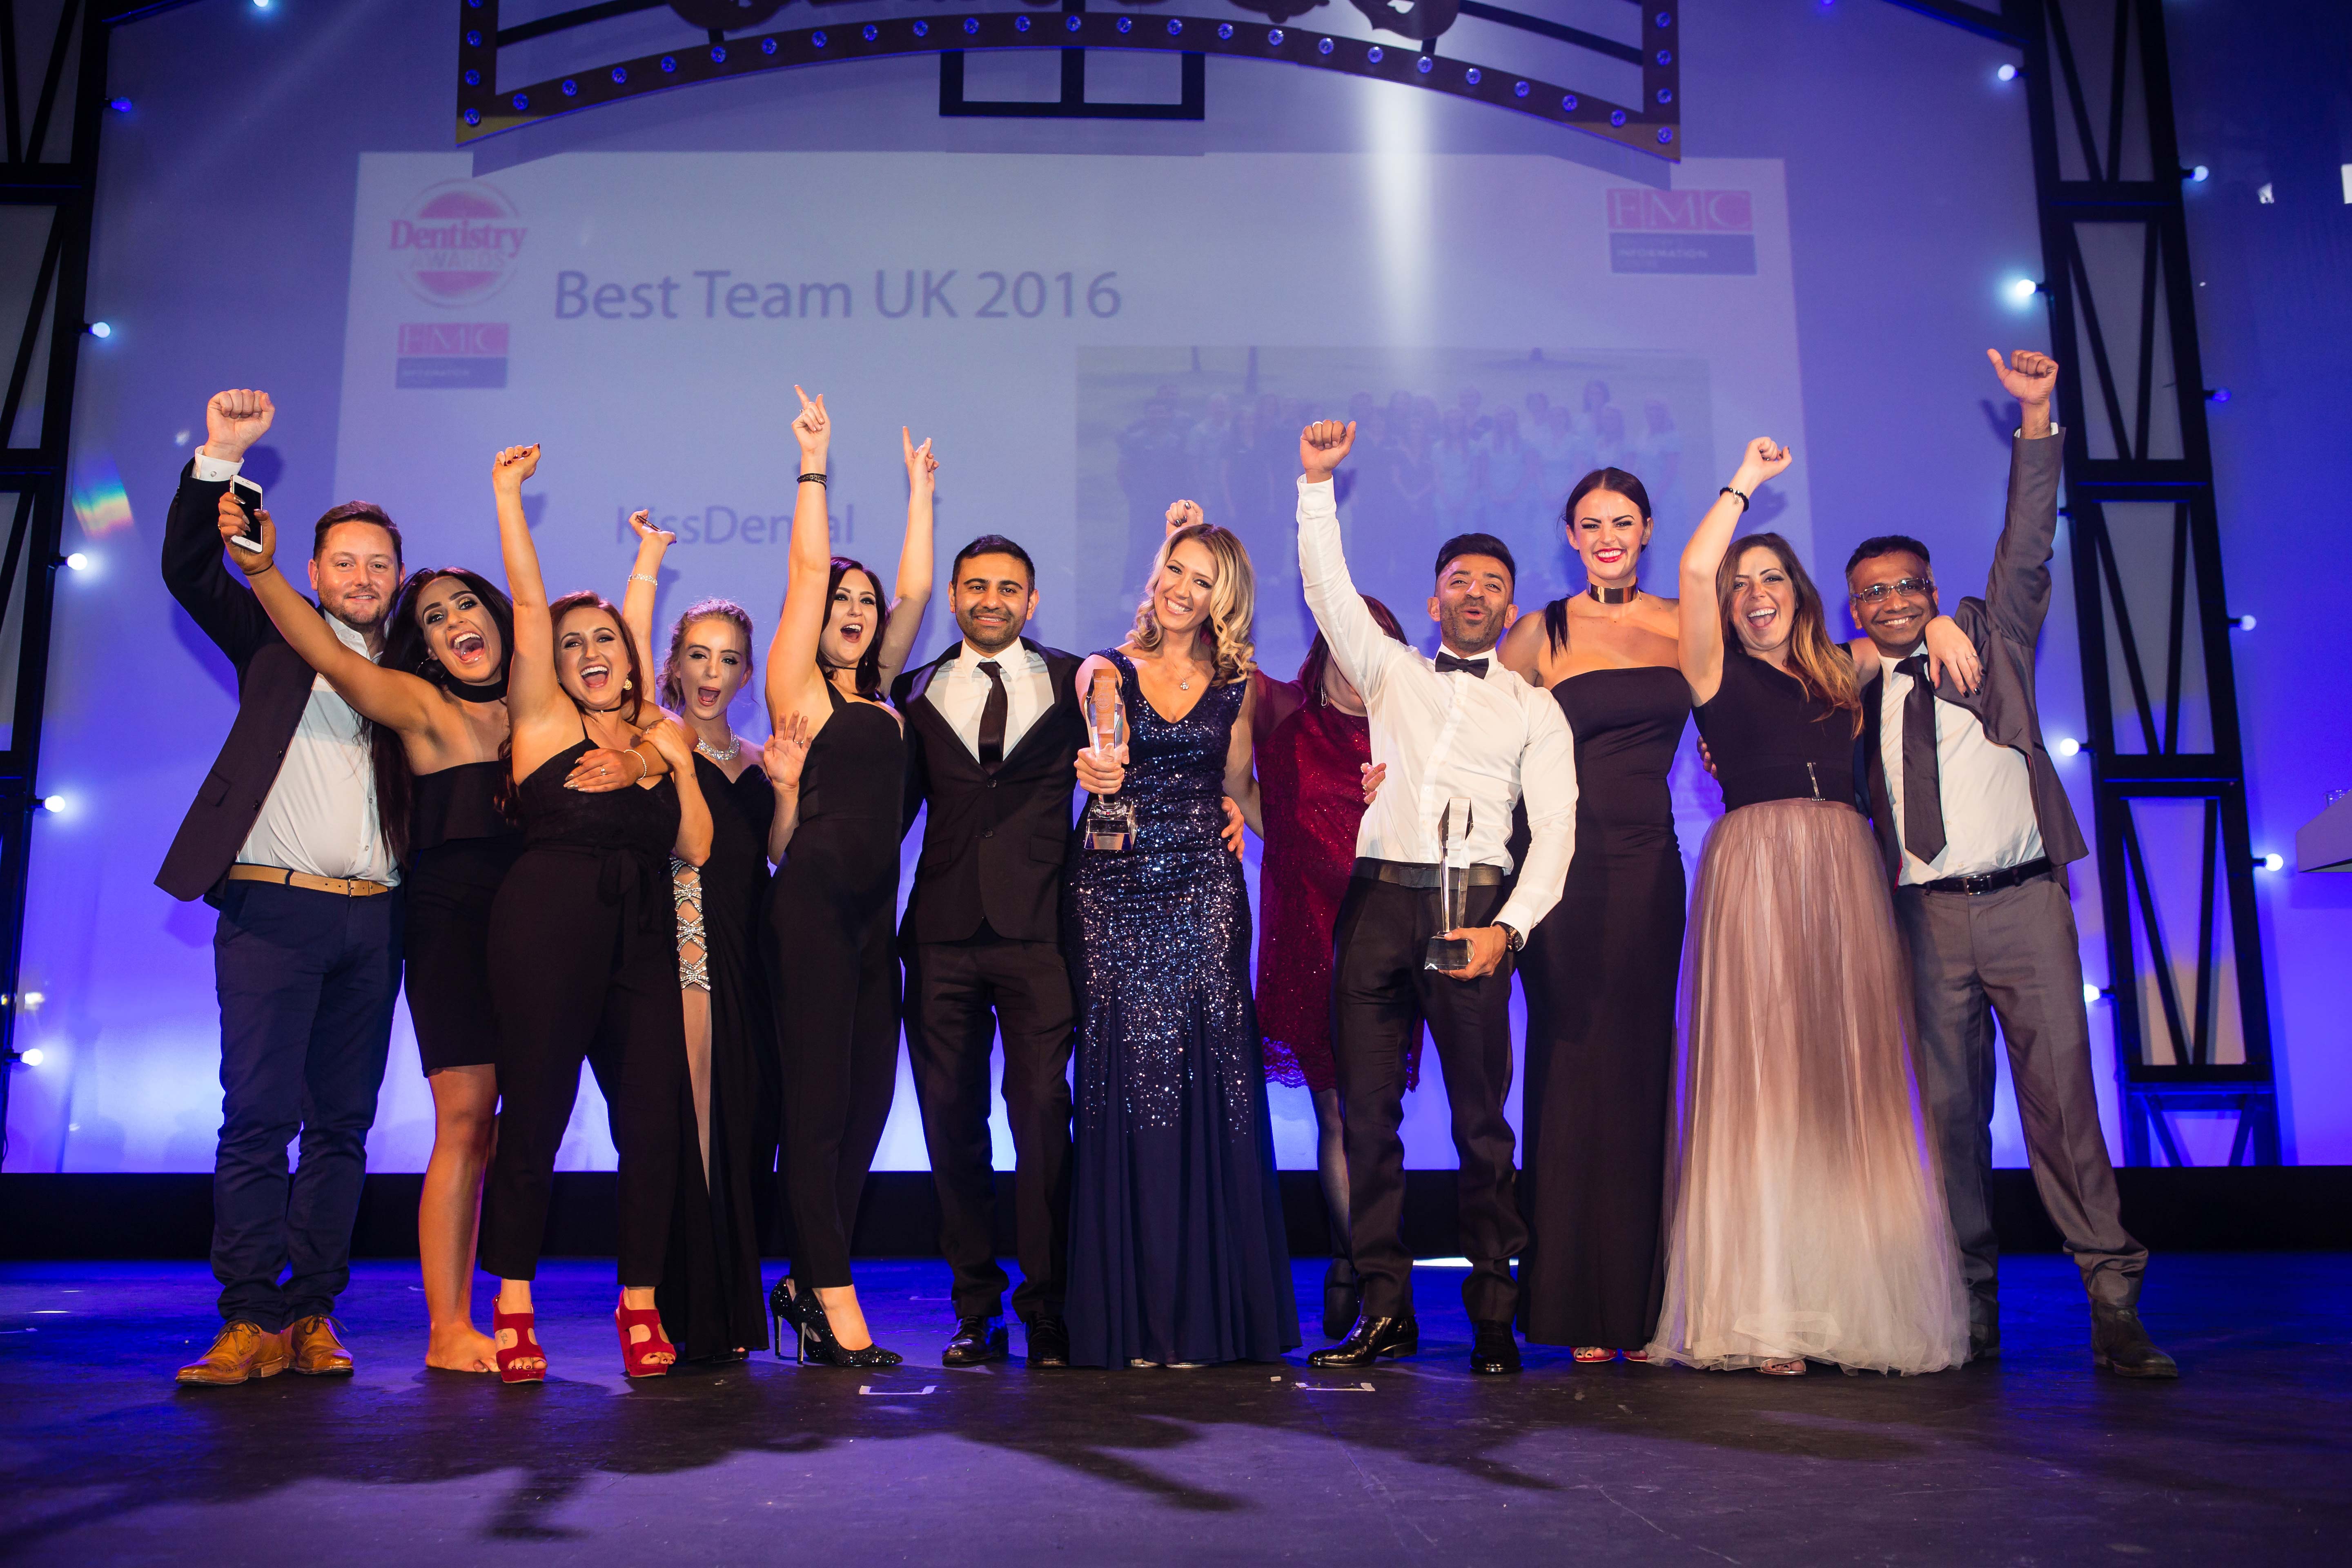 Dental team featured in BBC documentary all smiles thanks to awards success